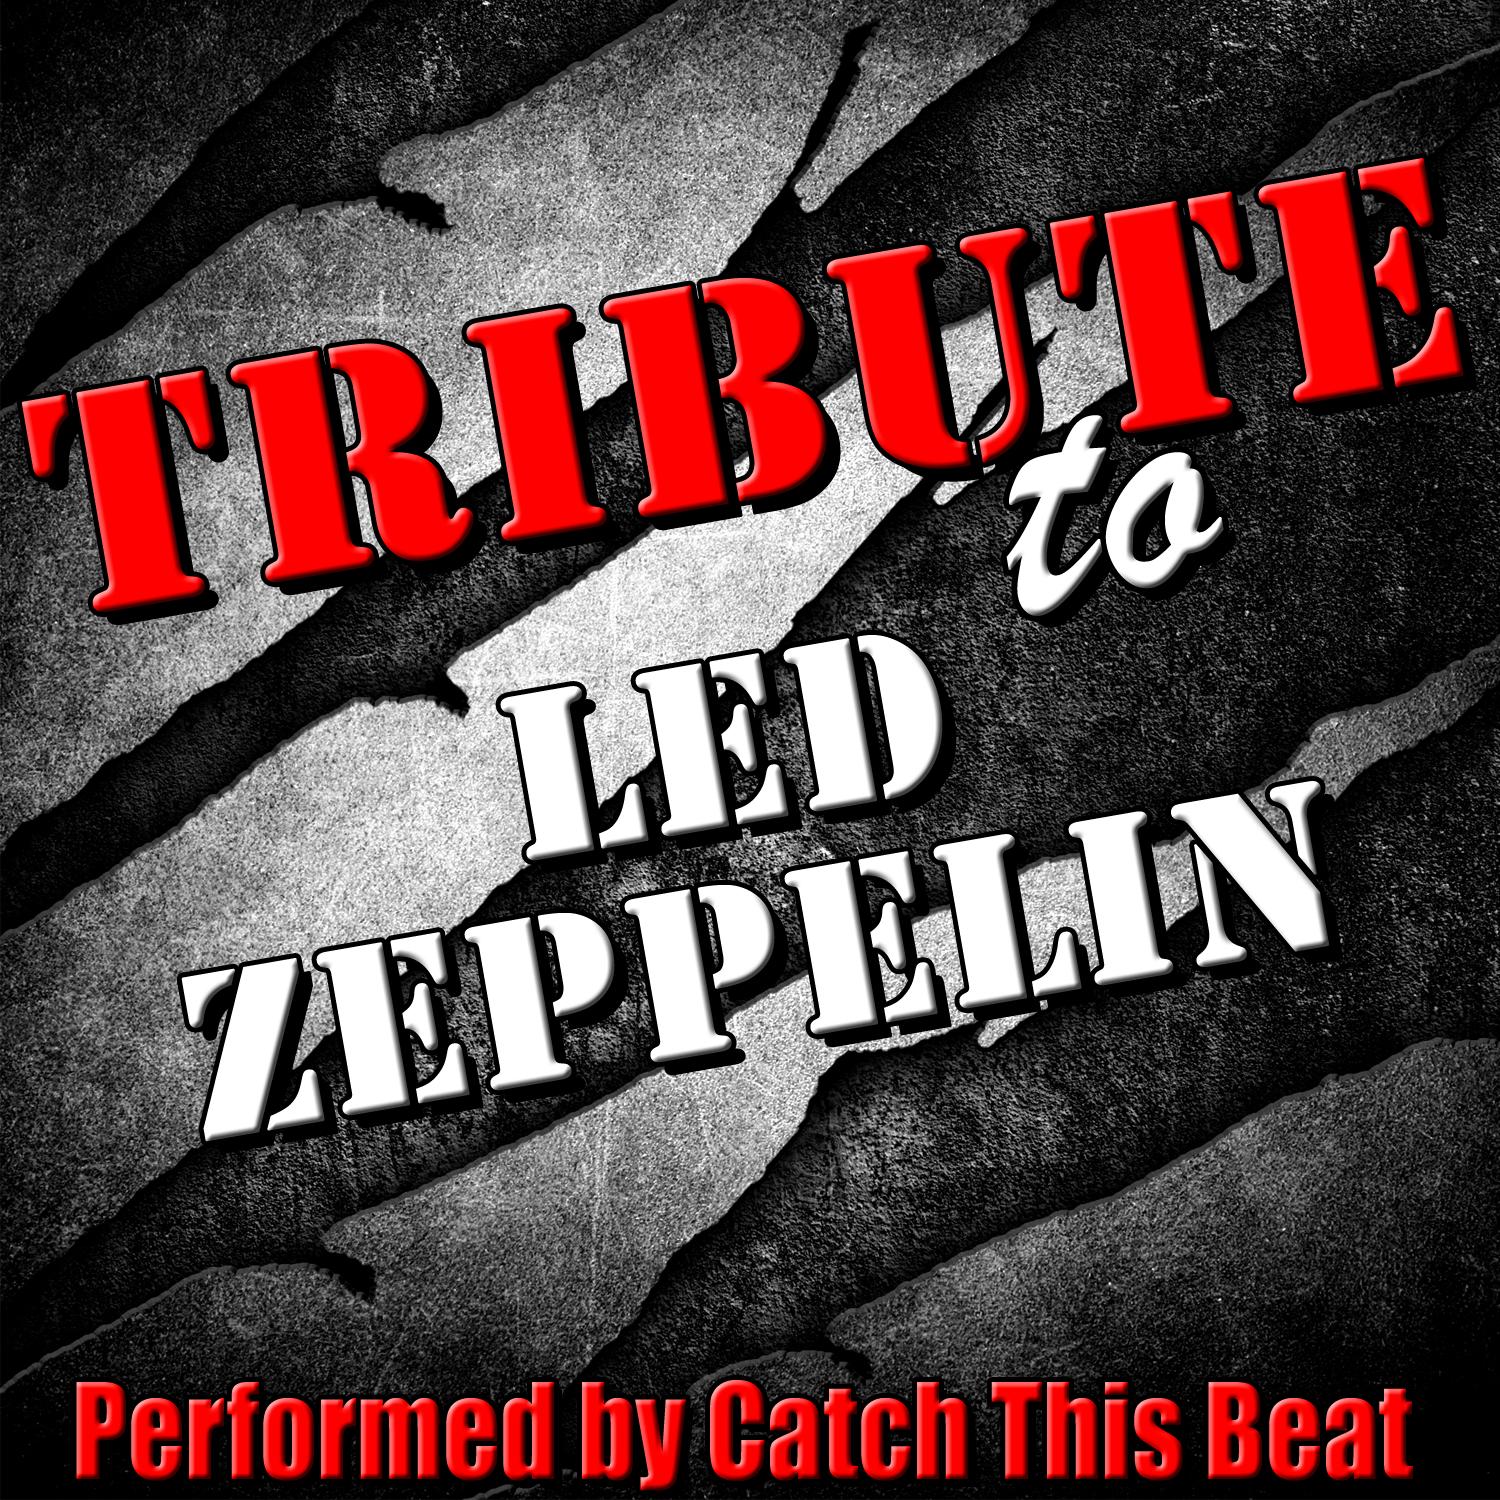 A Tribute to Led Zeppelin